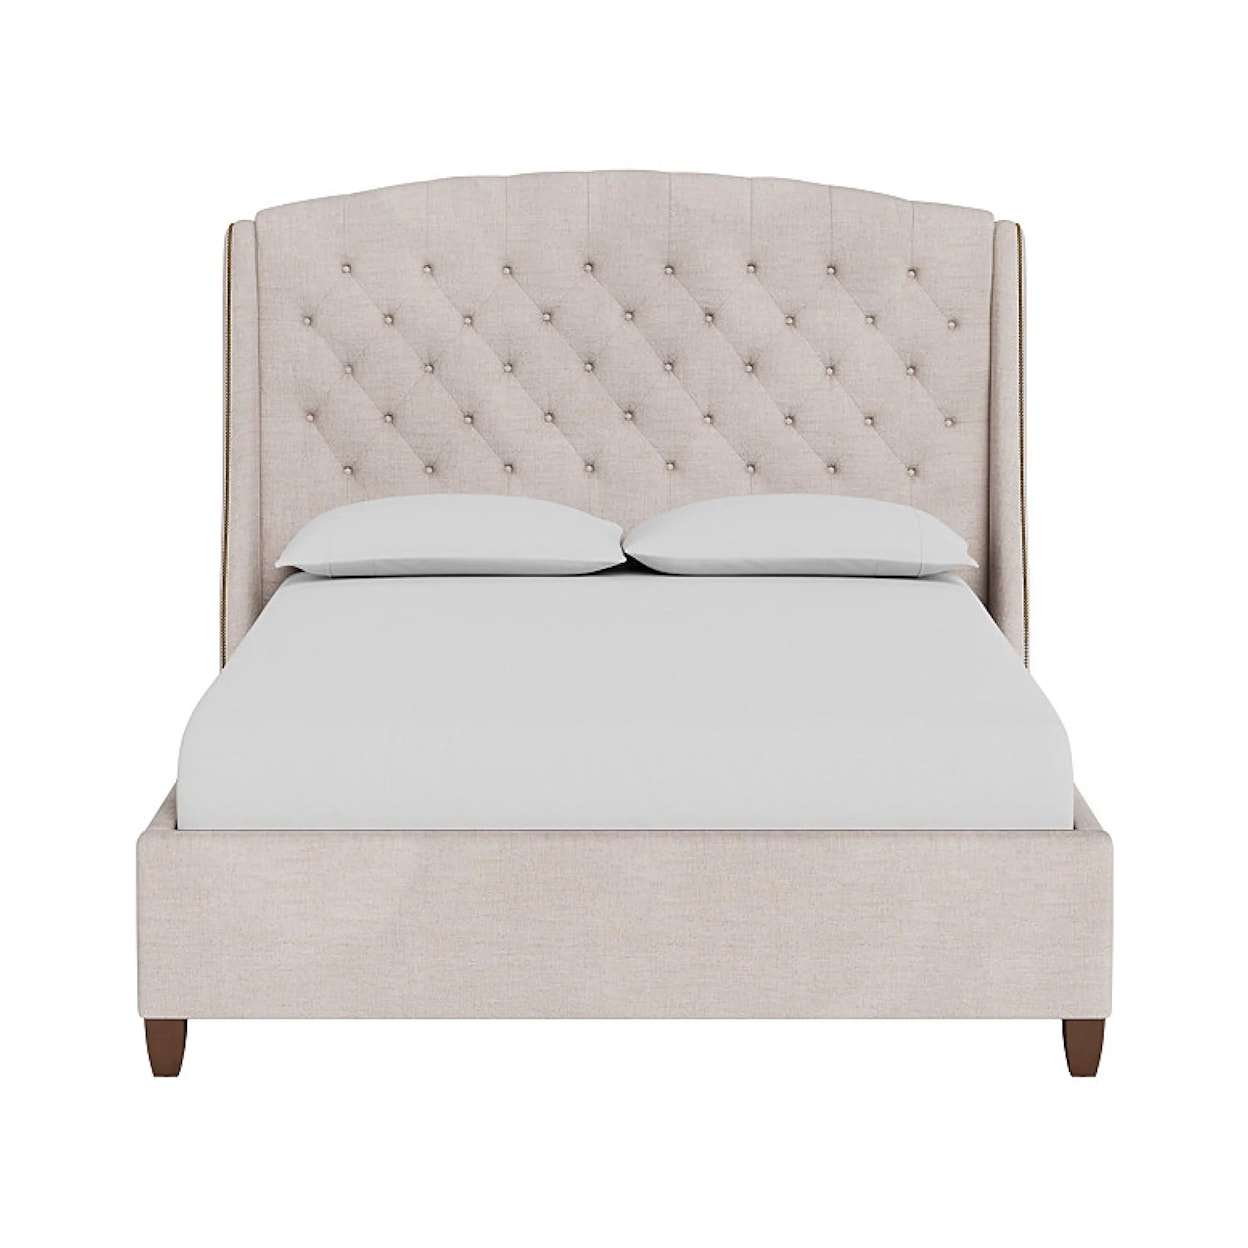 Universal Special Order King Halston Bed